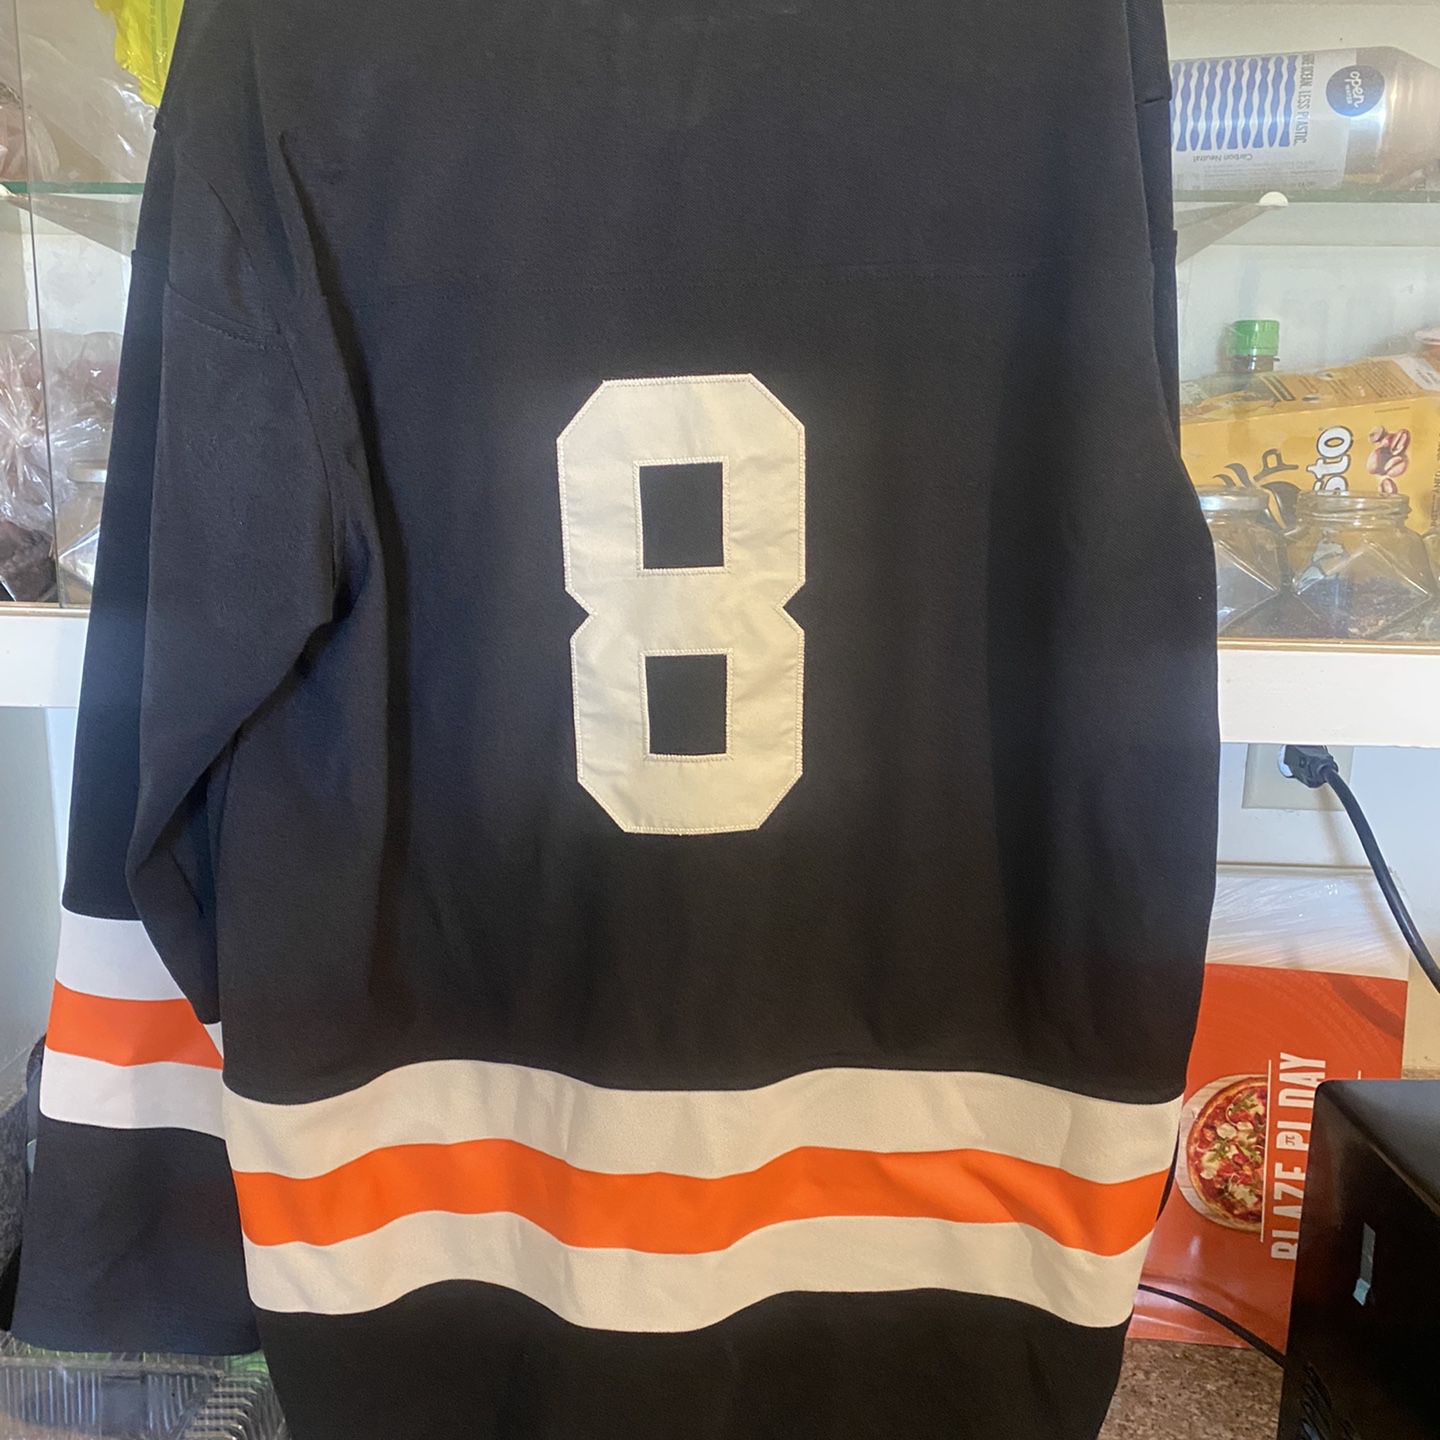 Play dirty hockey jersey. bought at undefeated